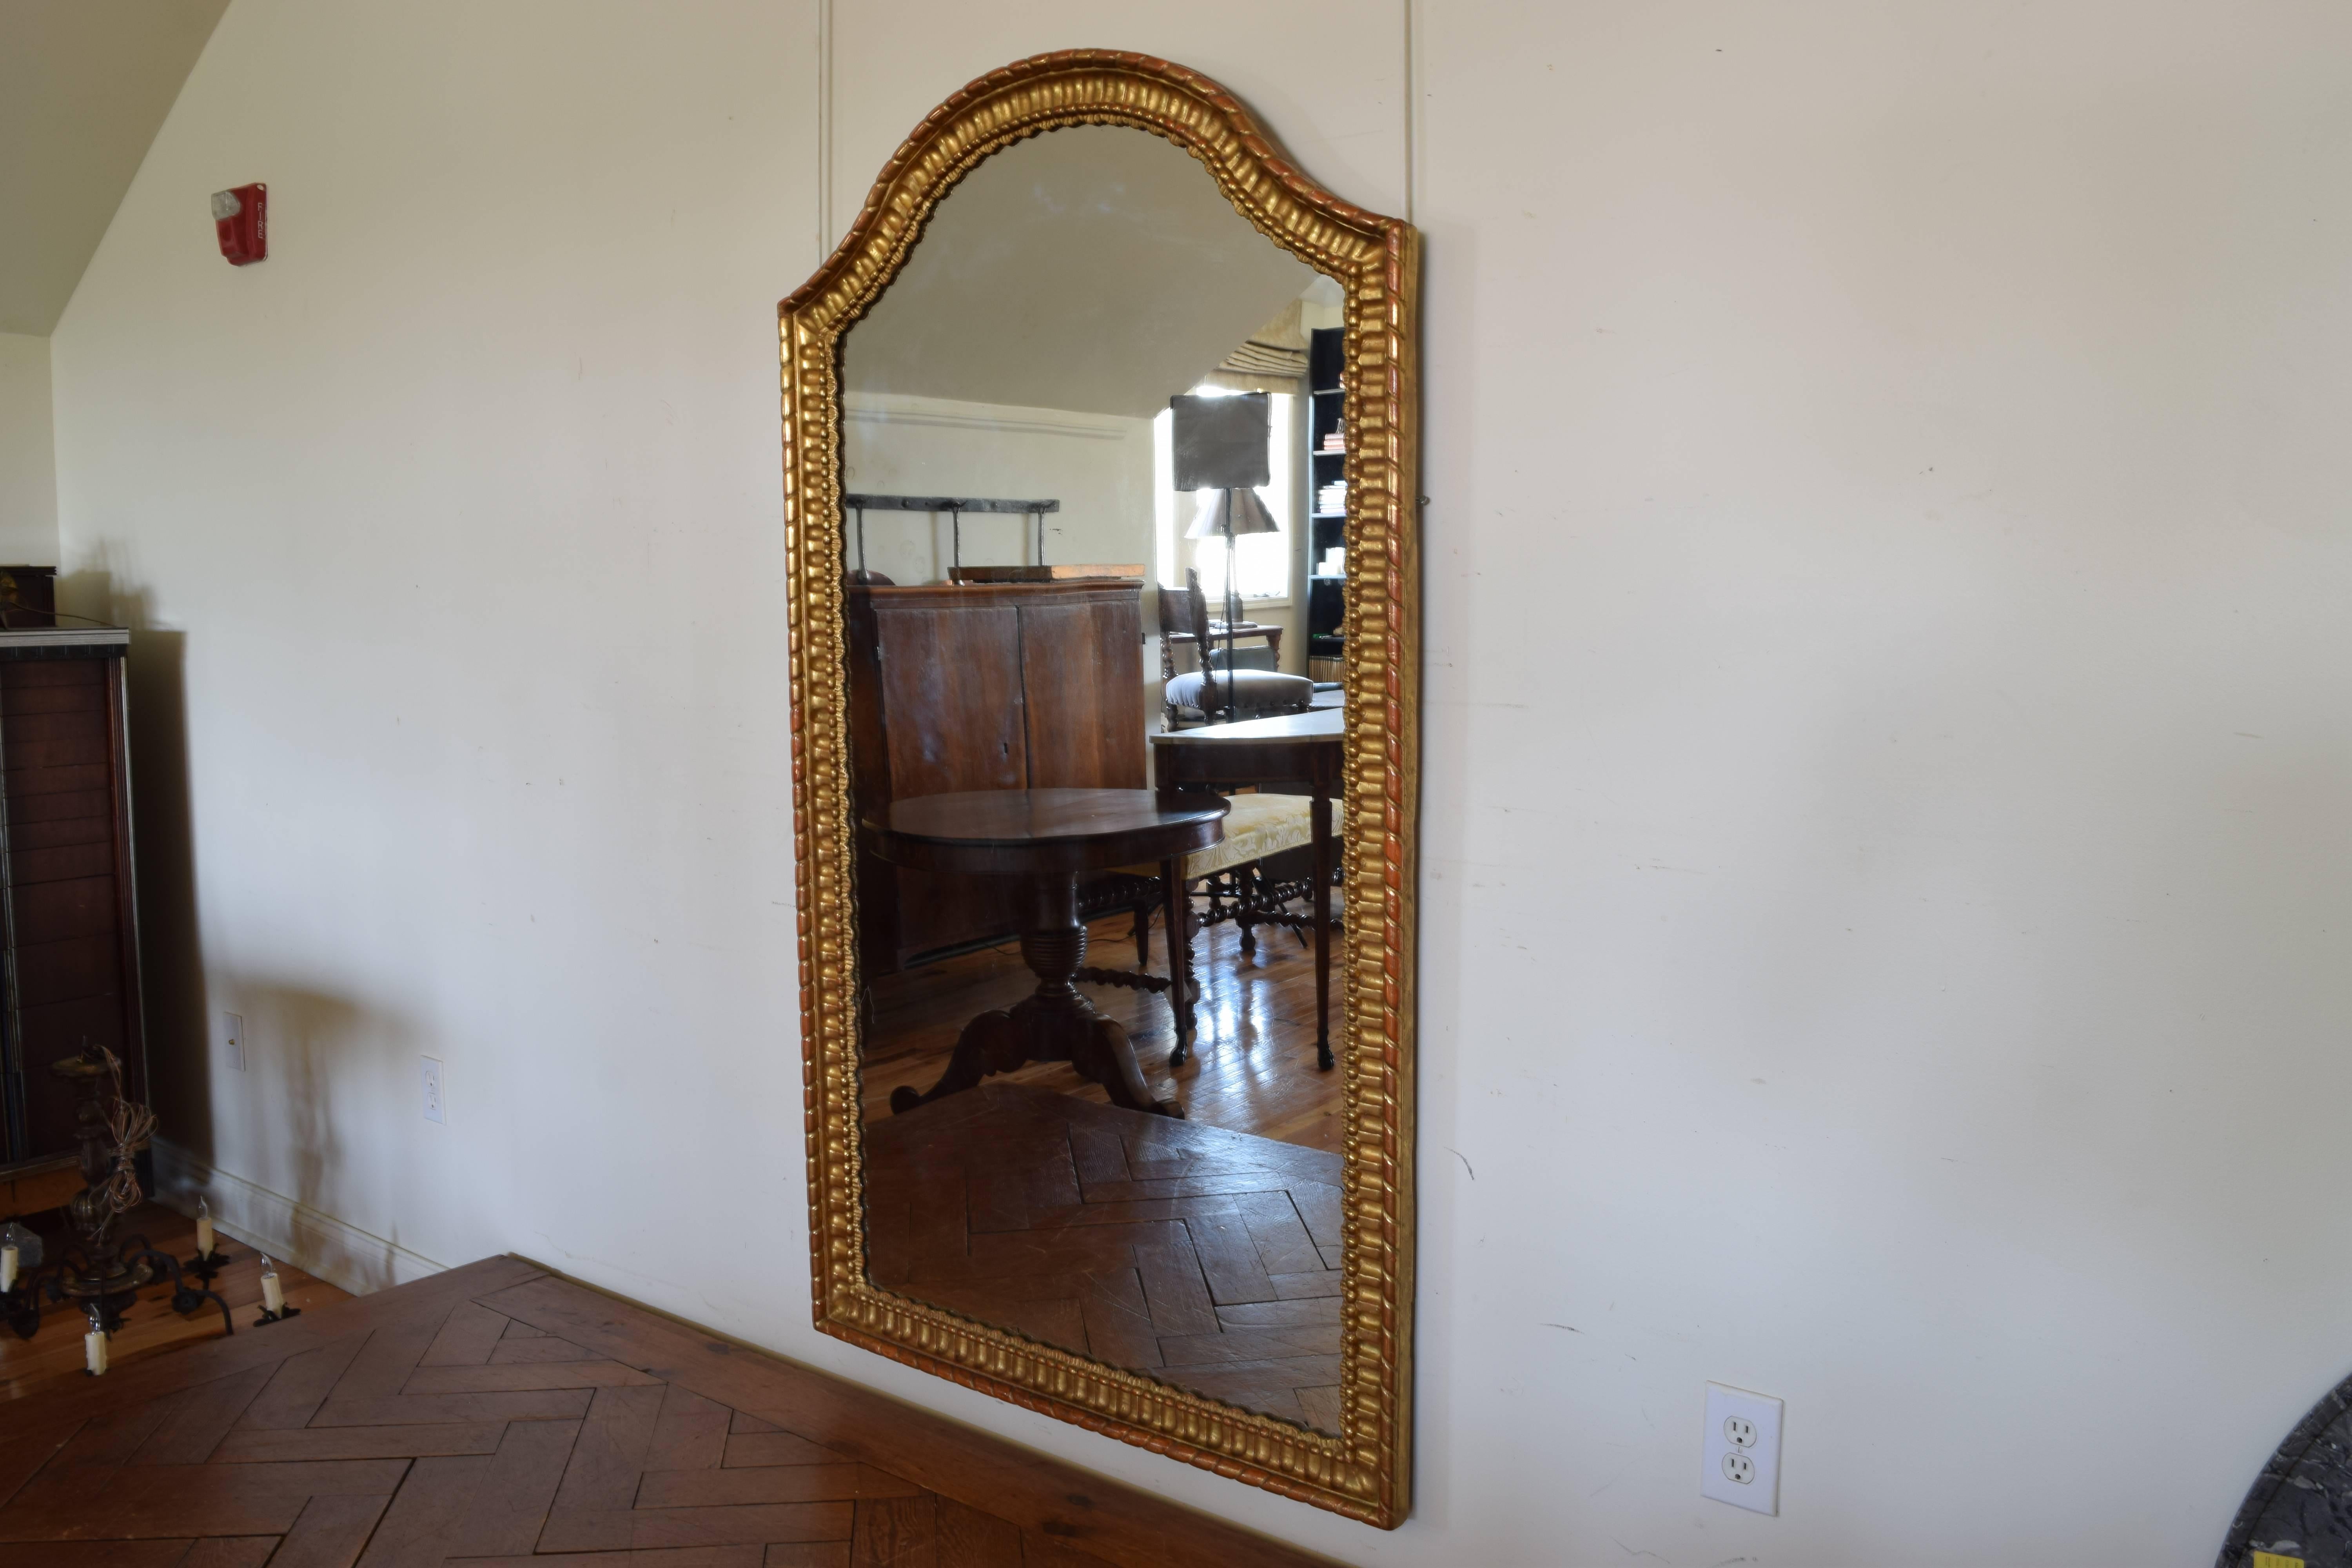 Italian rococo style tall carved giltwood mirror of rectangular form with an arched top, the molding carved and having bead molding.